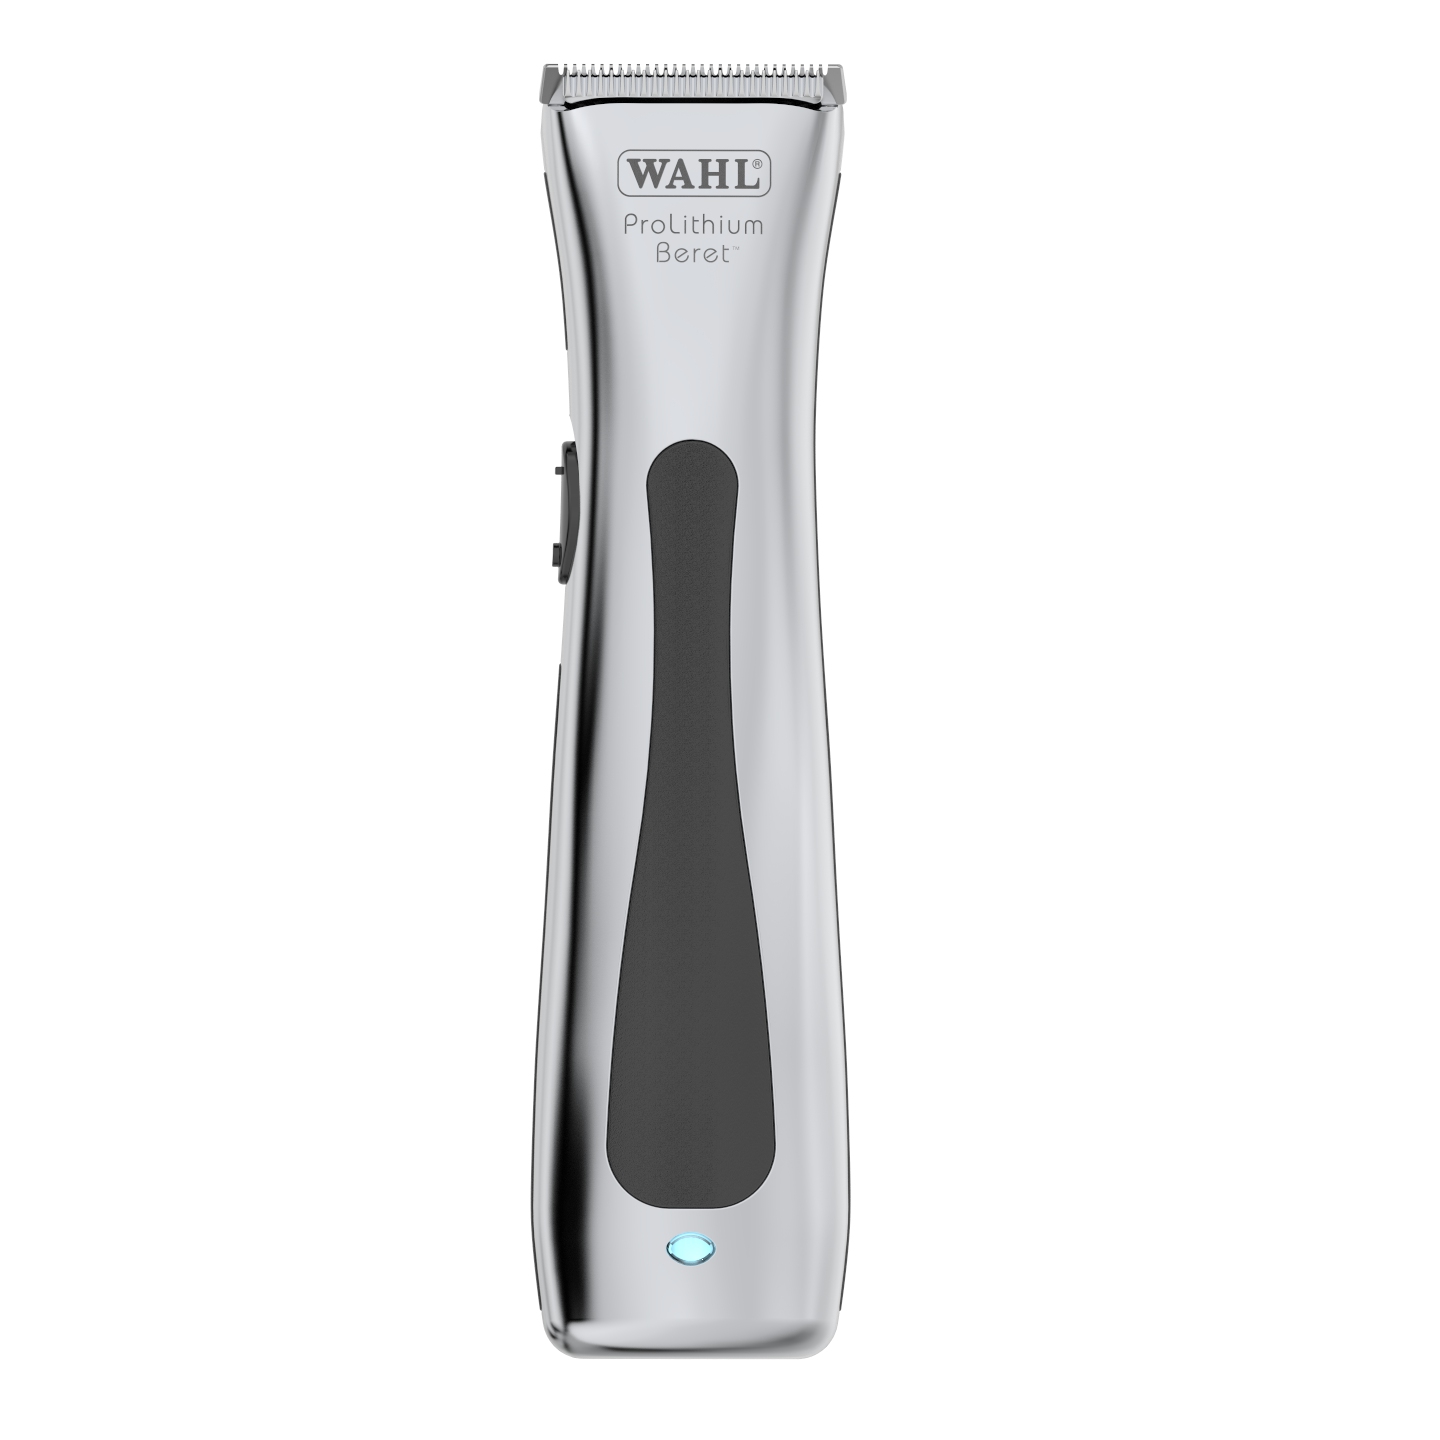 wahl lithium ion beret trimmer